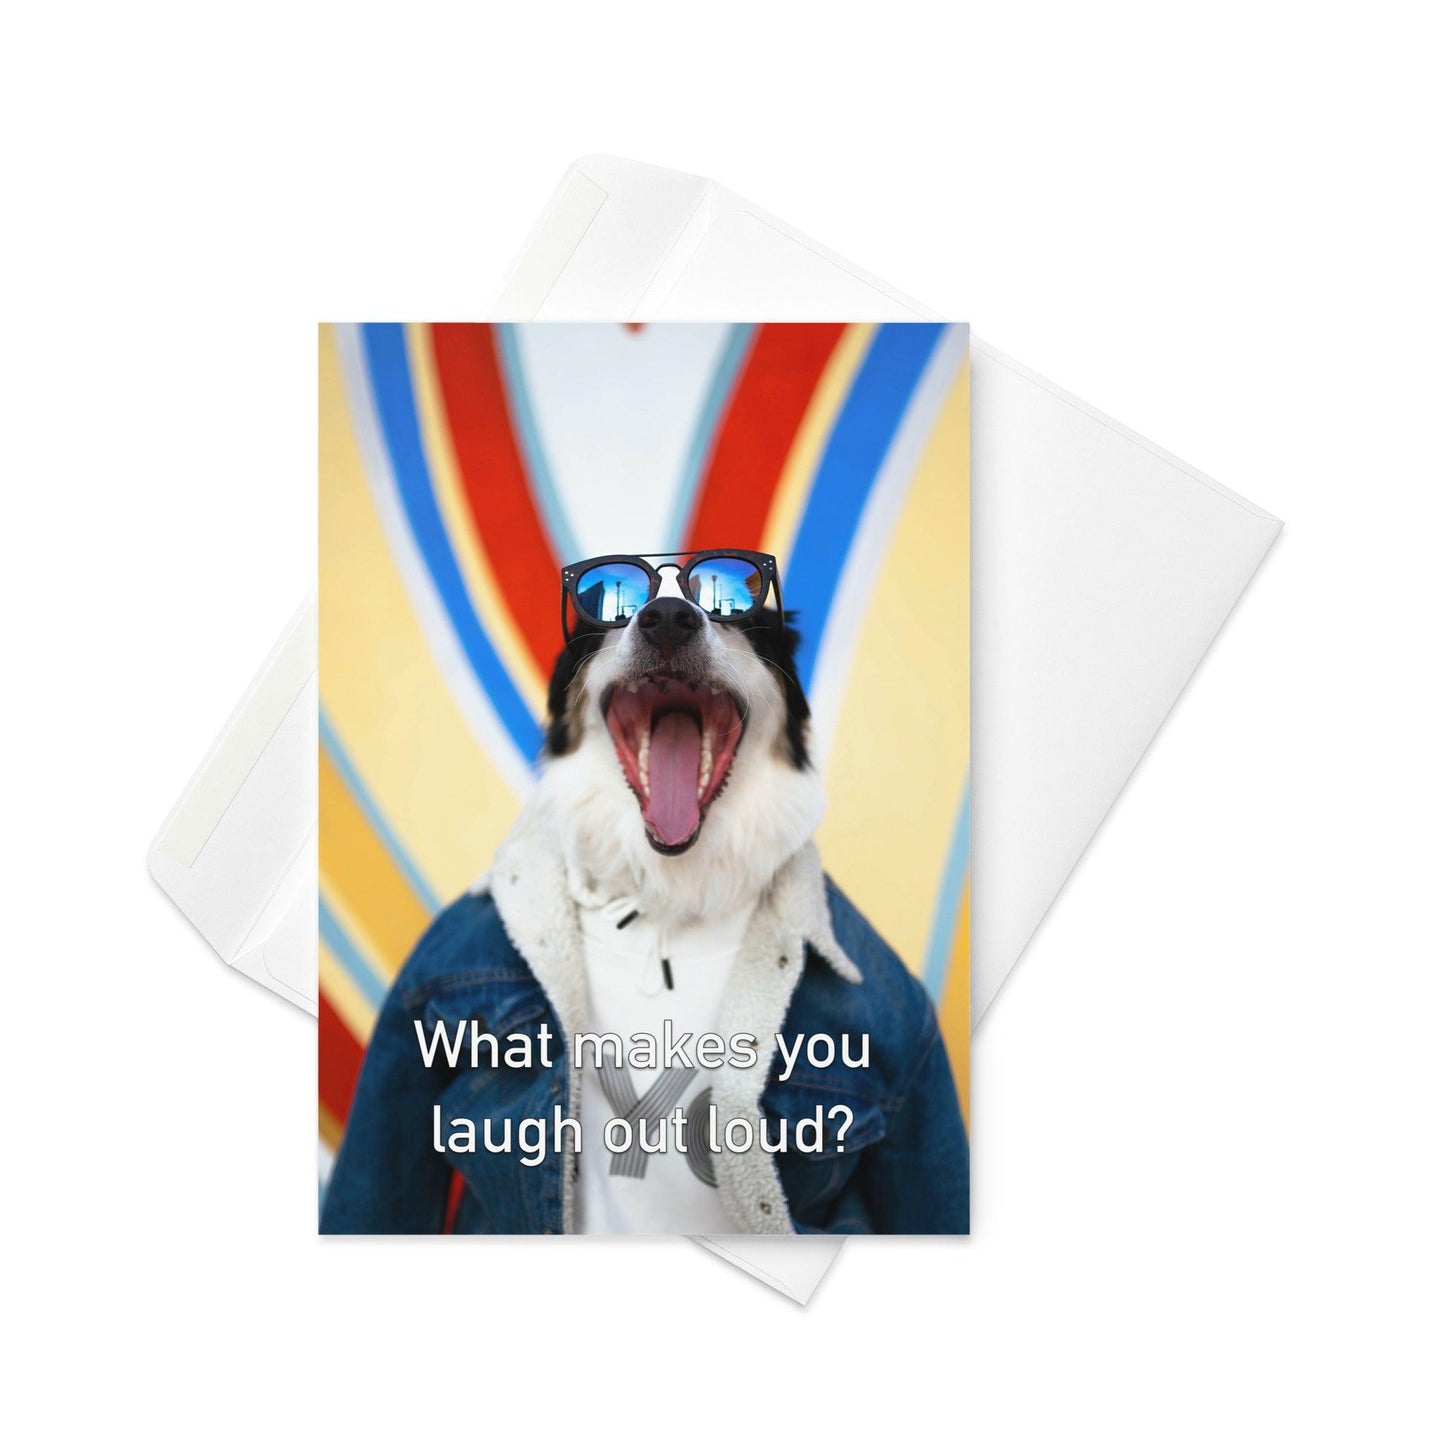 What Makes You Laugh Out Loud - Note Card - iSAW Company